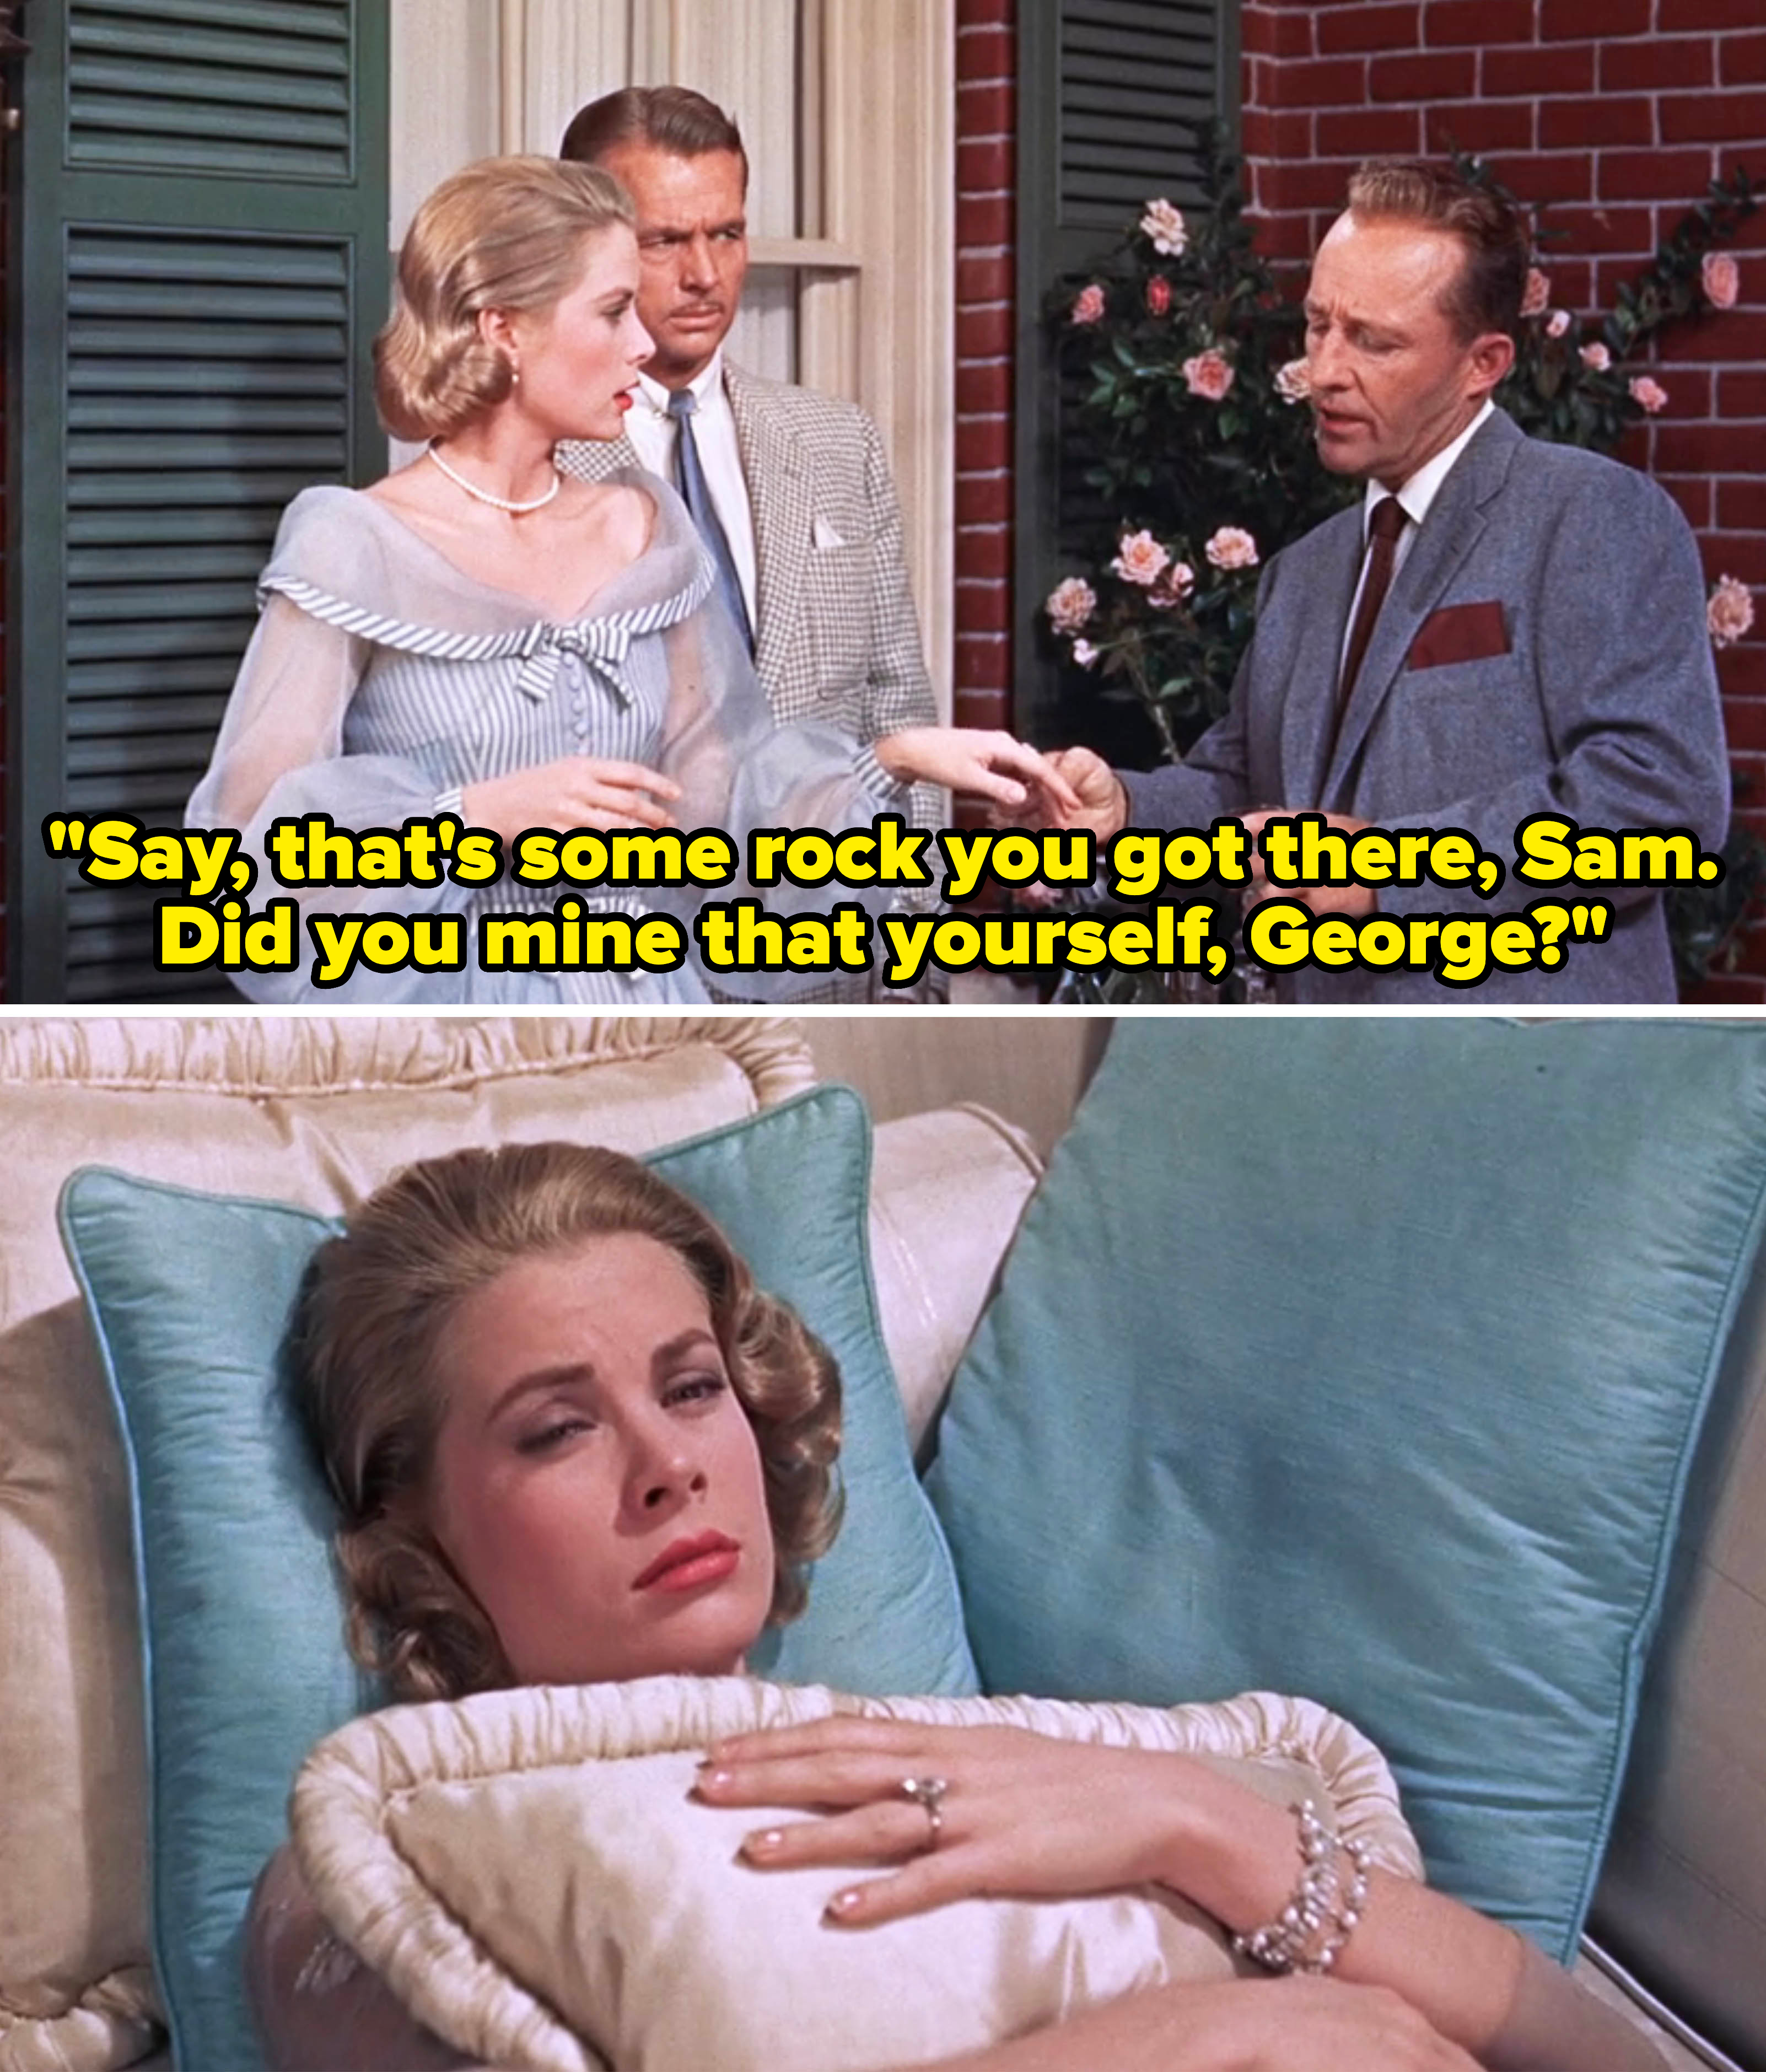 Grace Kelly in an elegant dress and pearls, with Bing Crosby commenting on her ring to another man in a suit, in a scene on top and is reclining with jewelry on the bottom